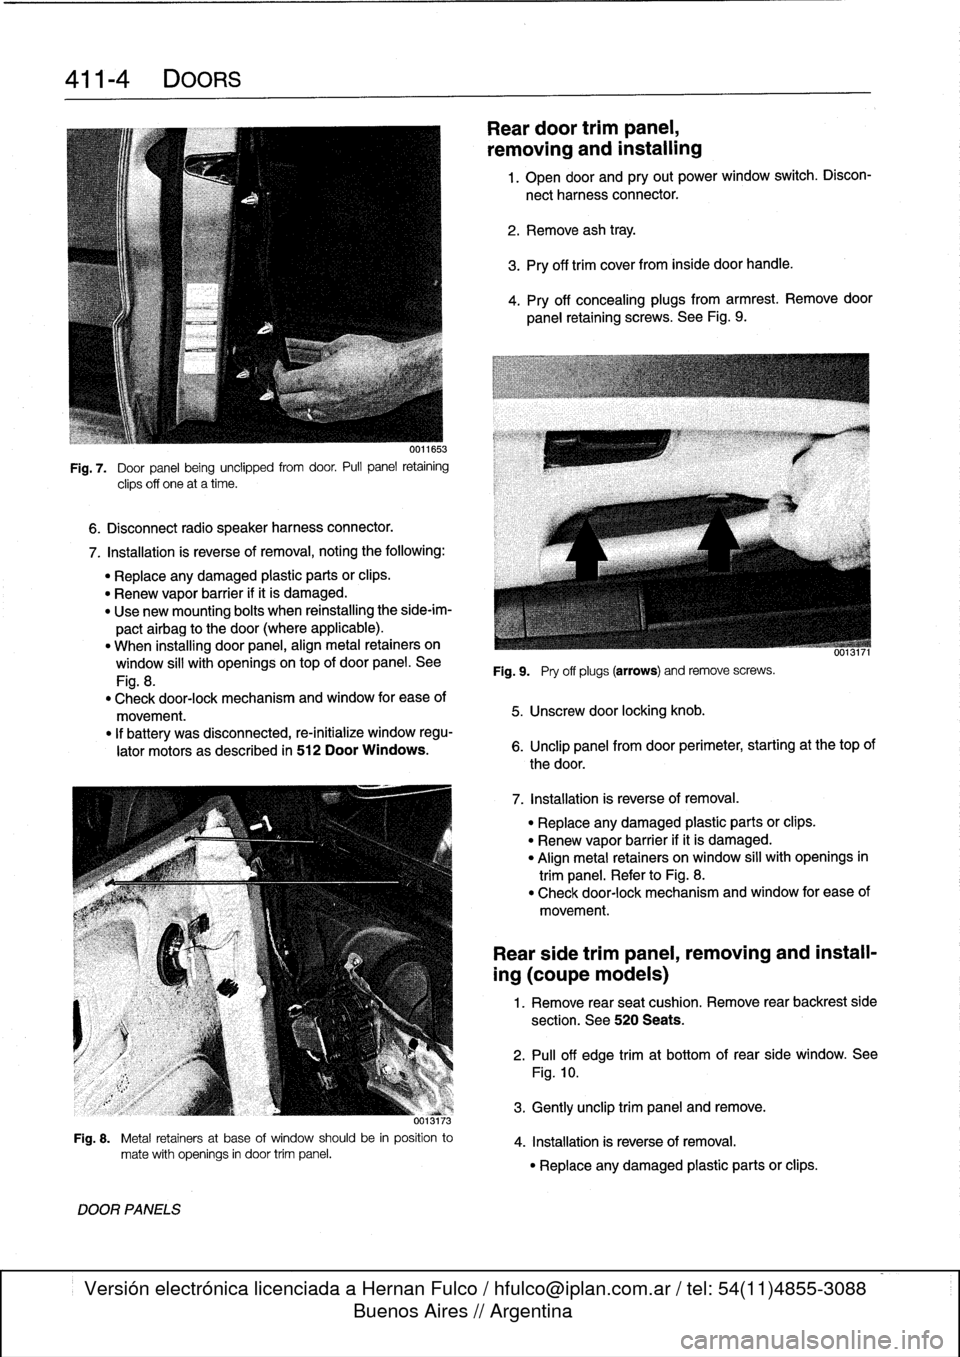 BMW 318i 1997 E36 Workshop Manual 
411-
4
DOORS

6
.
Disconnect
radio
speaker
harness
connector
.

Fig
.
7
.

	

Door
panel
being
unclipped
from
door
.
Pull
panel
retaining

clips
off
one
at
a
time
.

7
.
Installation
is
reverse
of
re